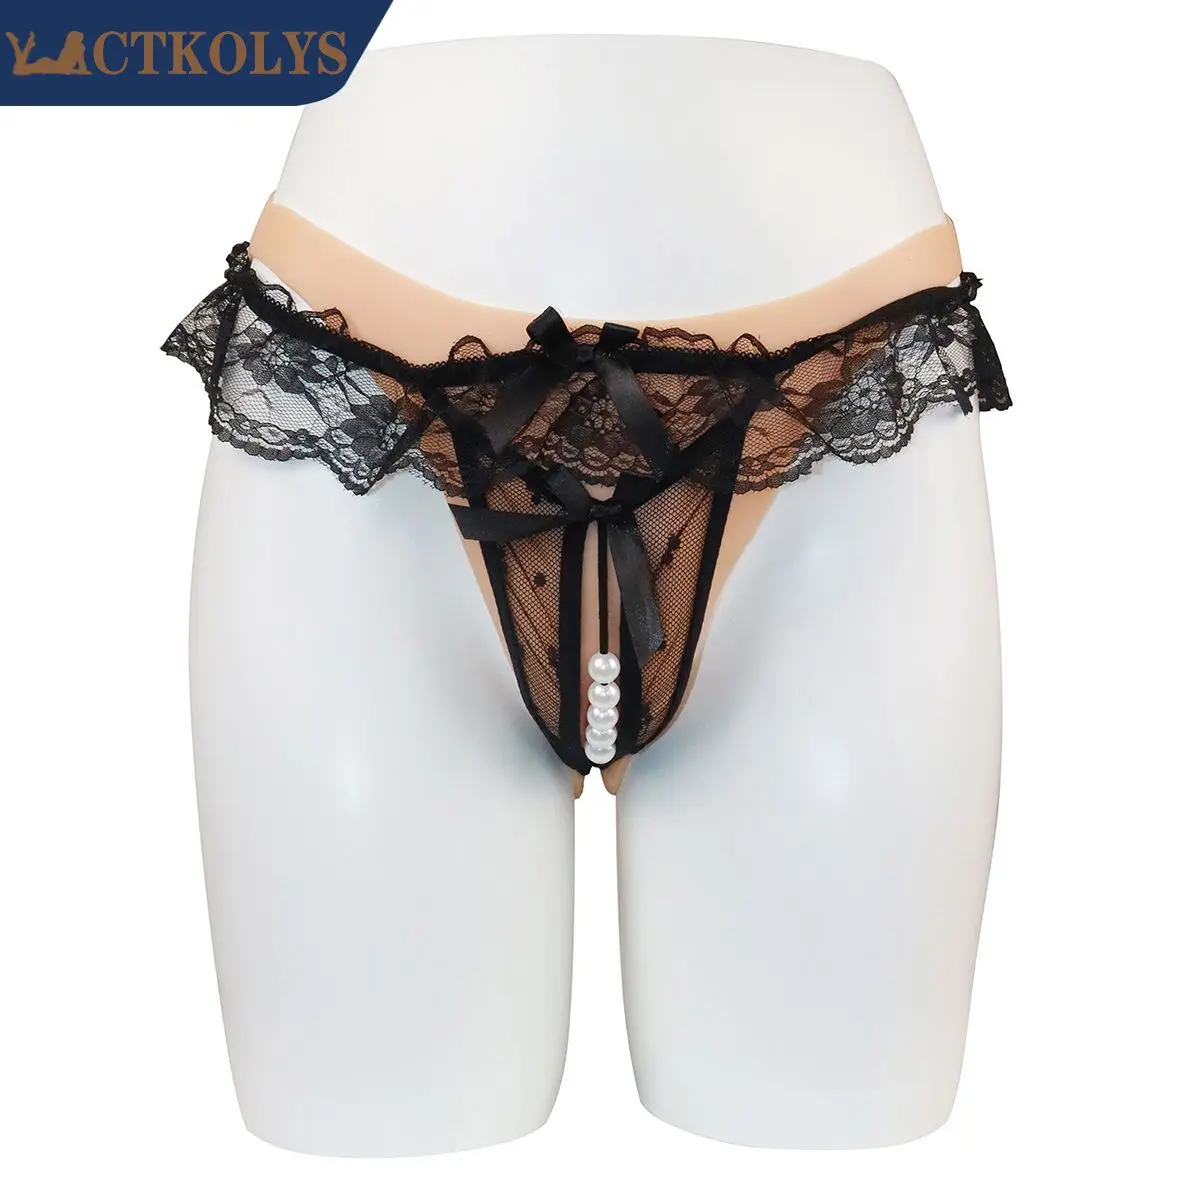 CTKOLYS Fake Vagina Panty Crossdressing Silicone Vagina Panty Realistic Pussy Underwear For Shemale Drag Queensgender Drag Queen